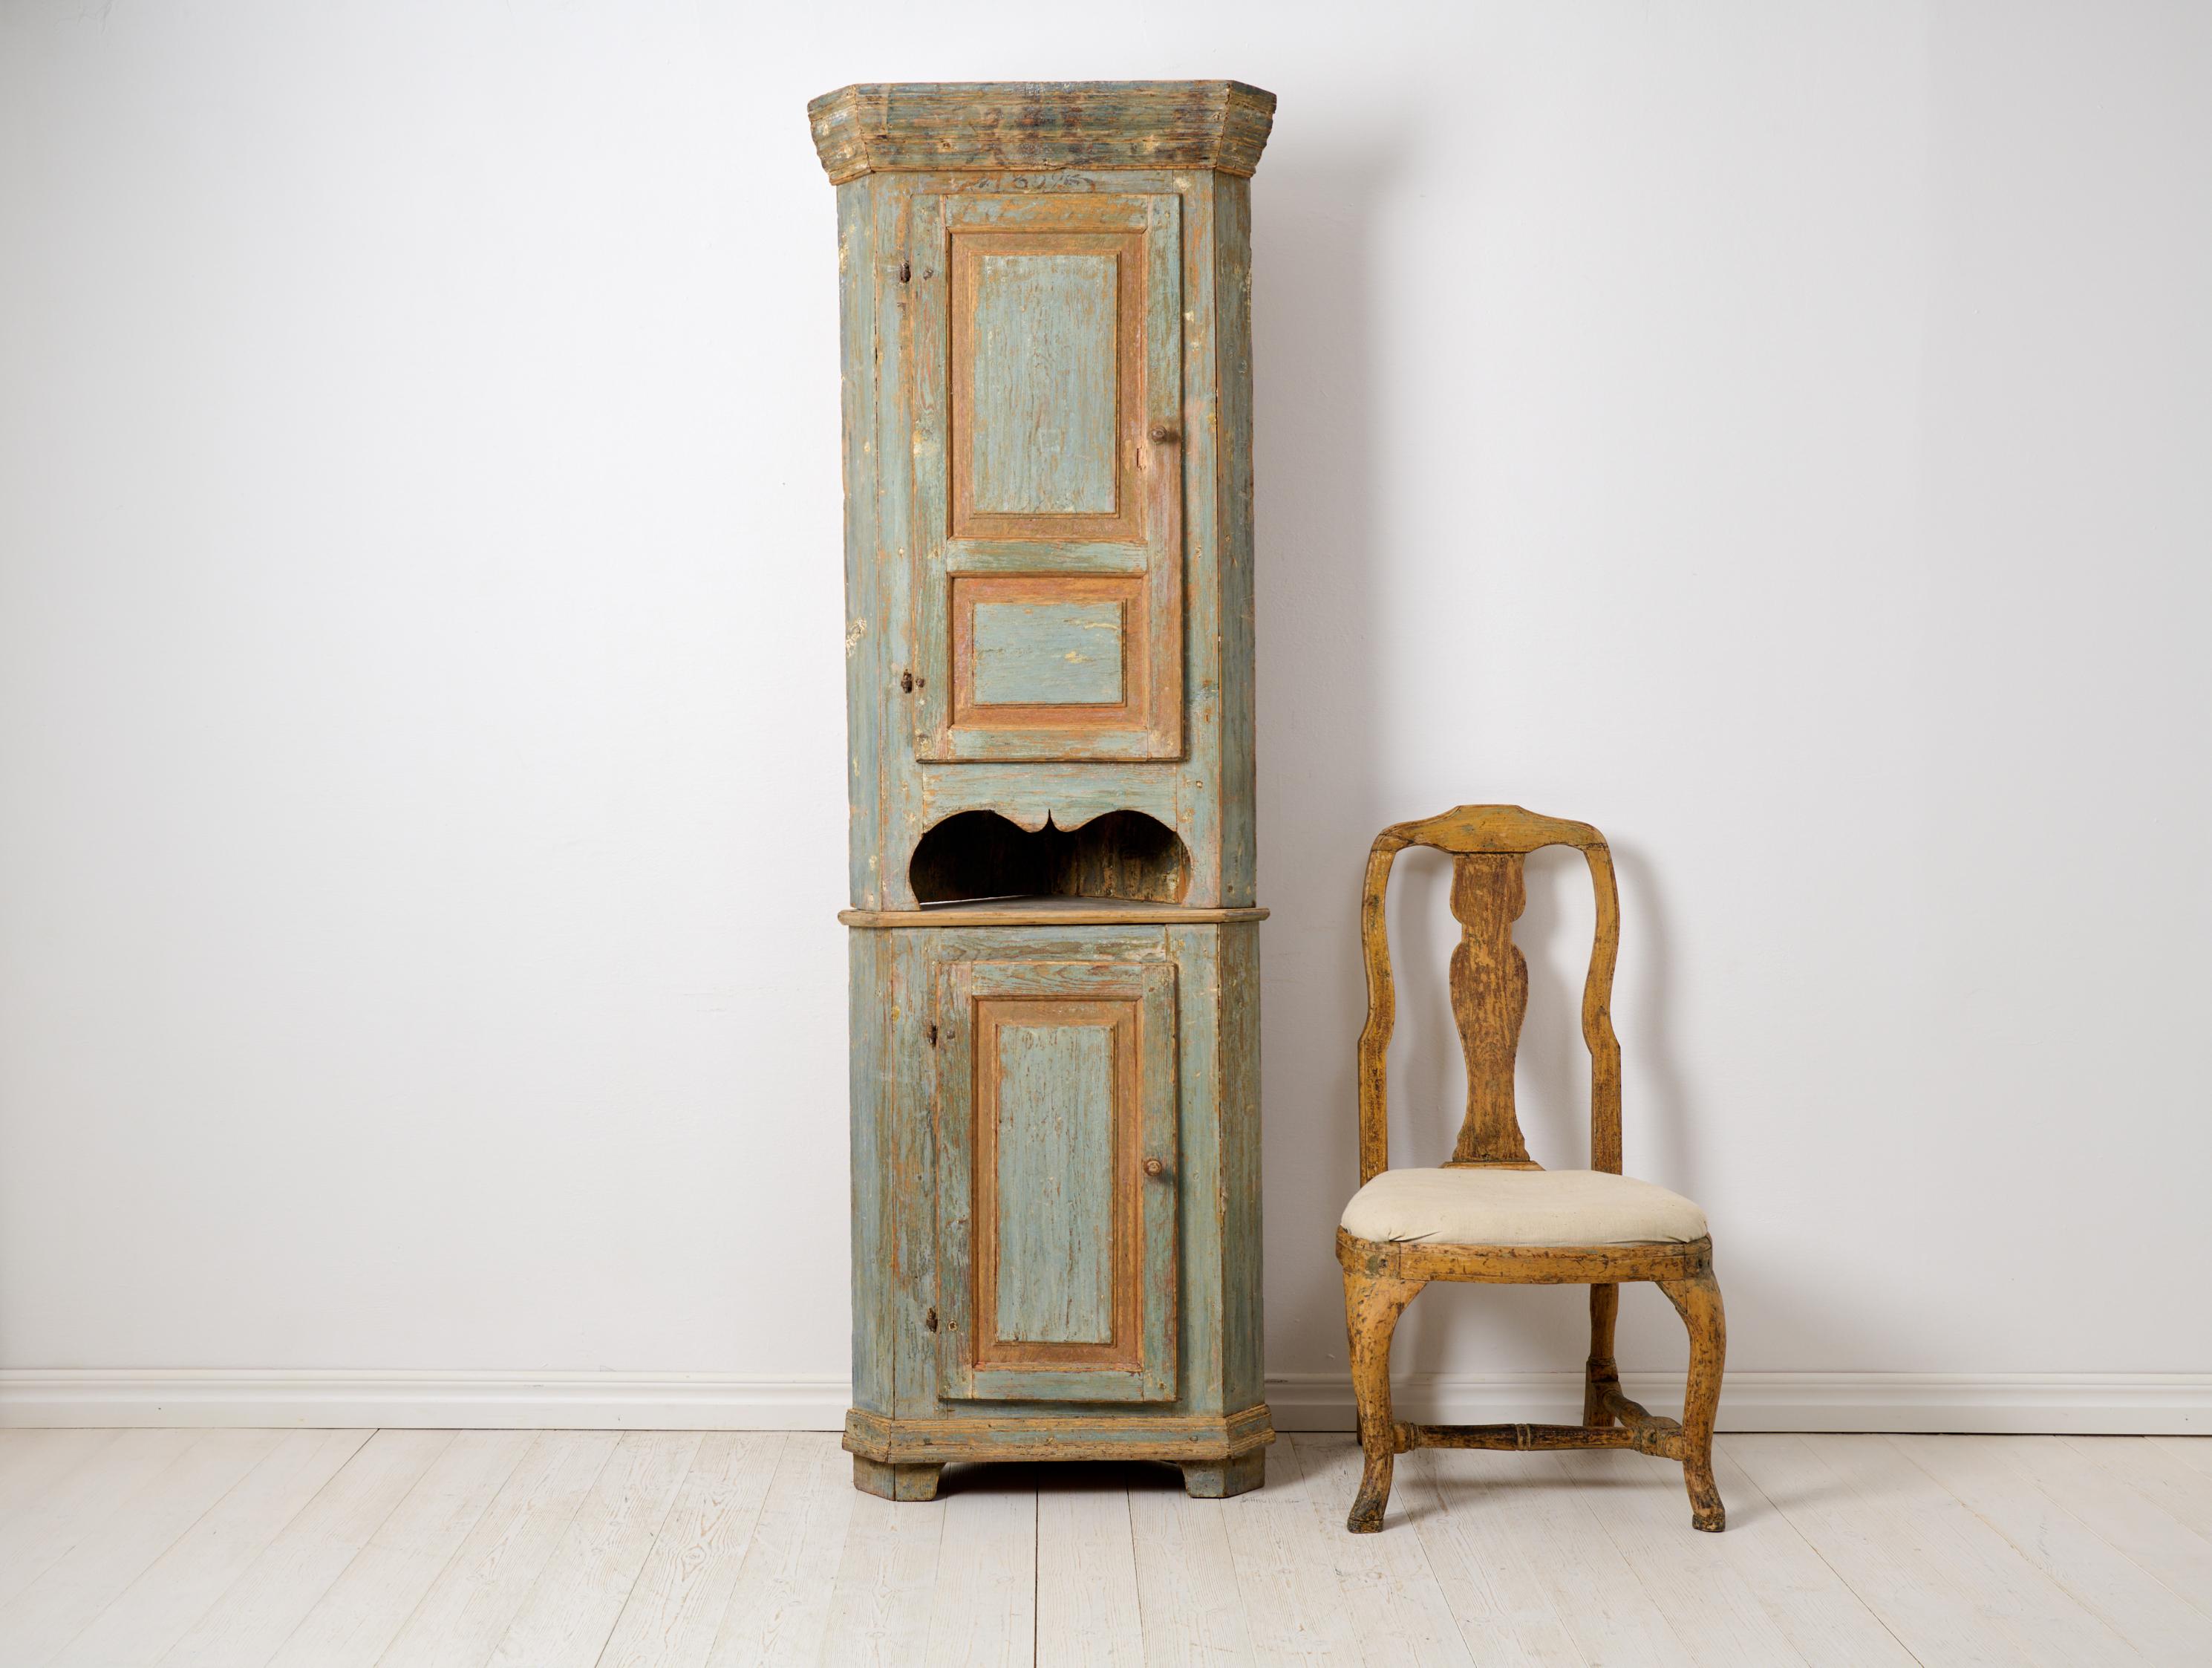 Unusual country corner cabinet from northern Sweden. The cabinet is a genuine country house furniture and is very unusual. It is made very tall and narrow, please refer to the measurements. Made in two parts and dry scraped by hand down to the first